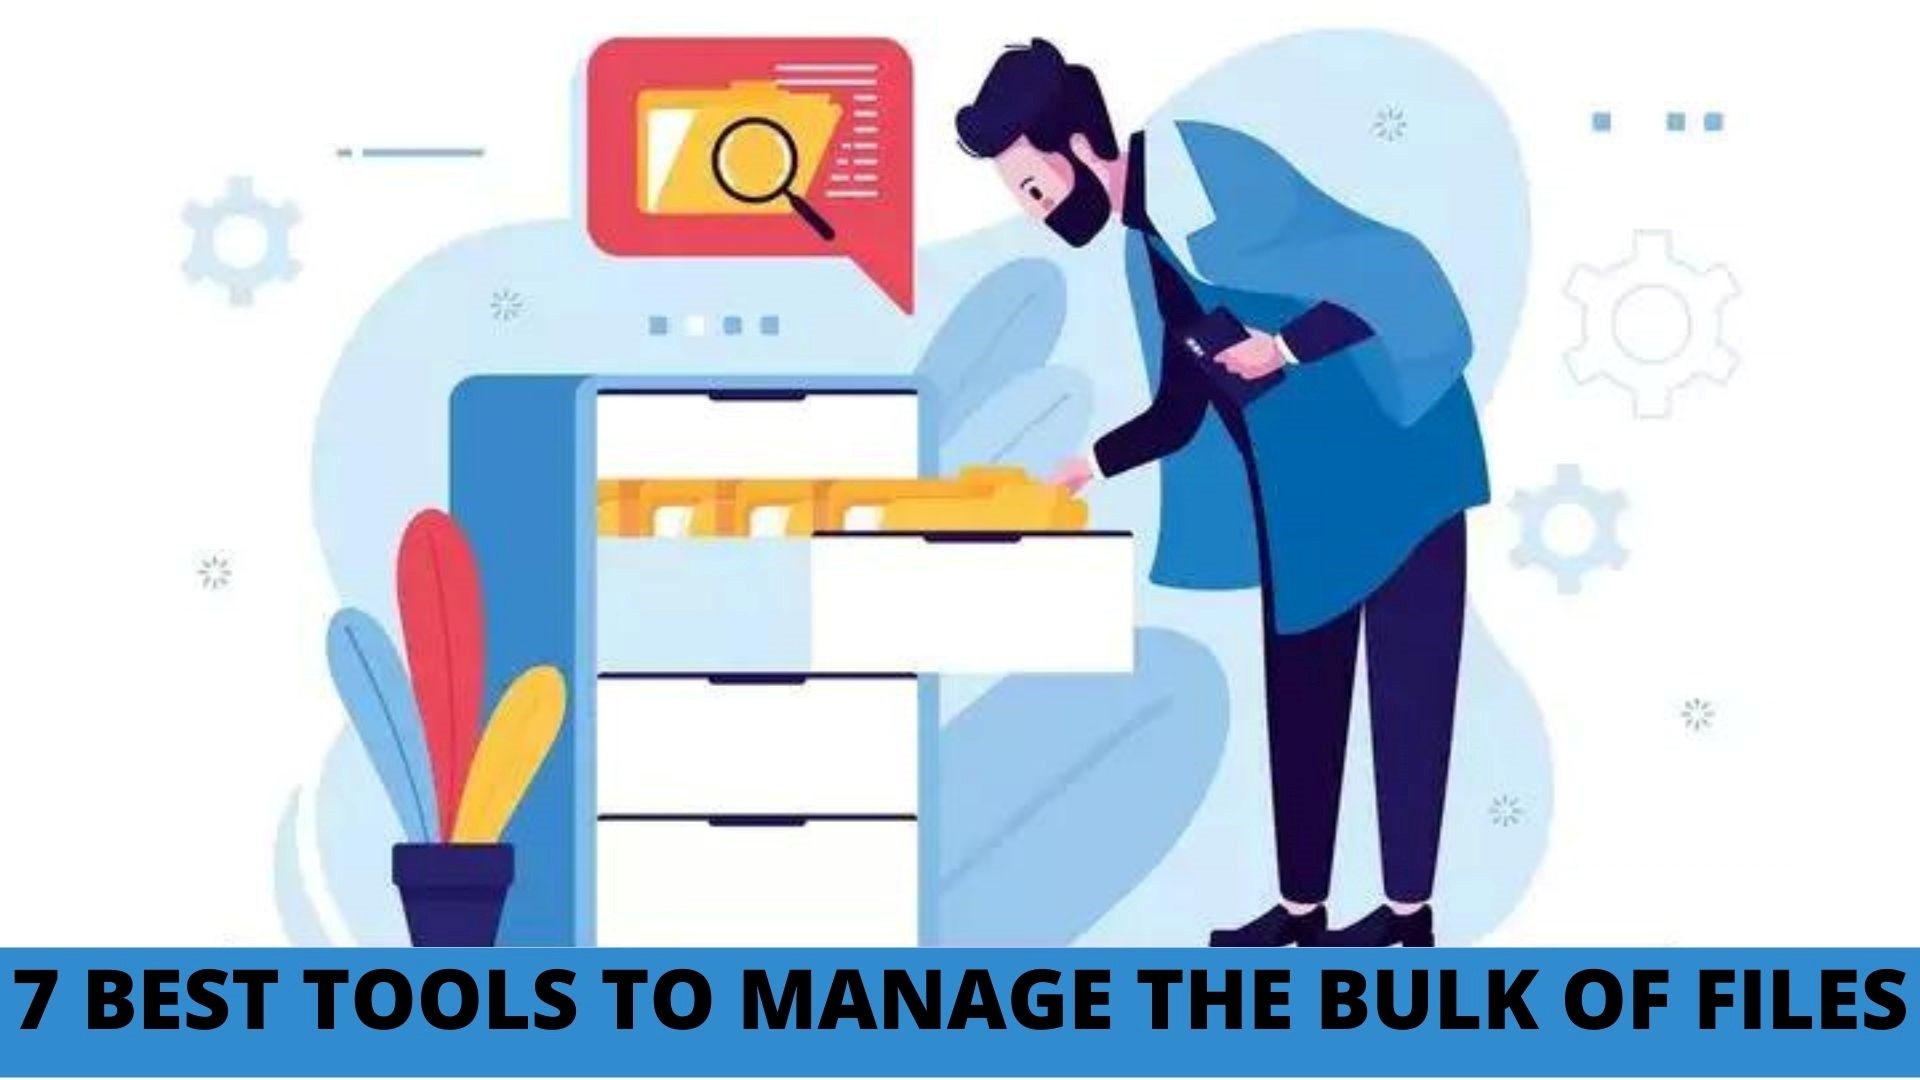 Best Tools to Manage the Bulk of Files